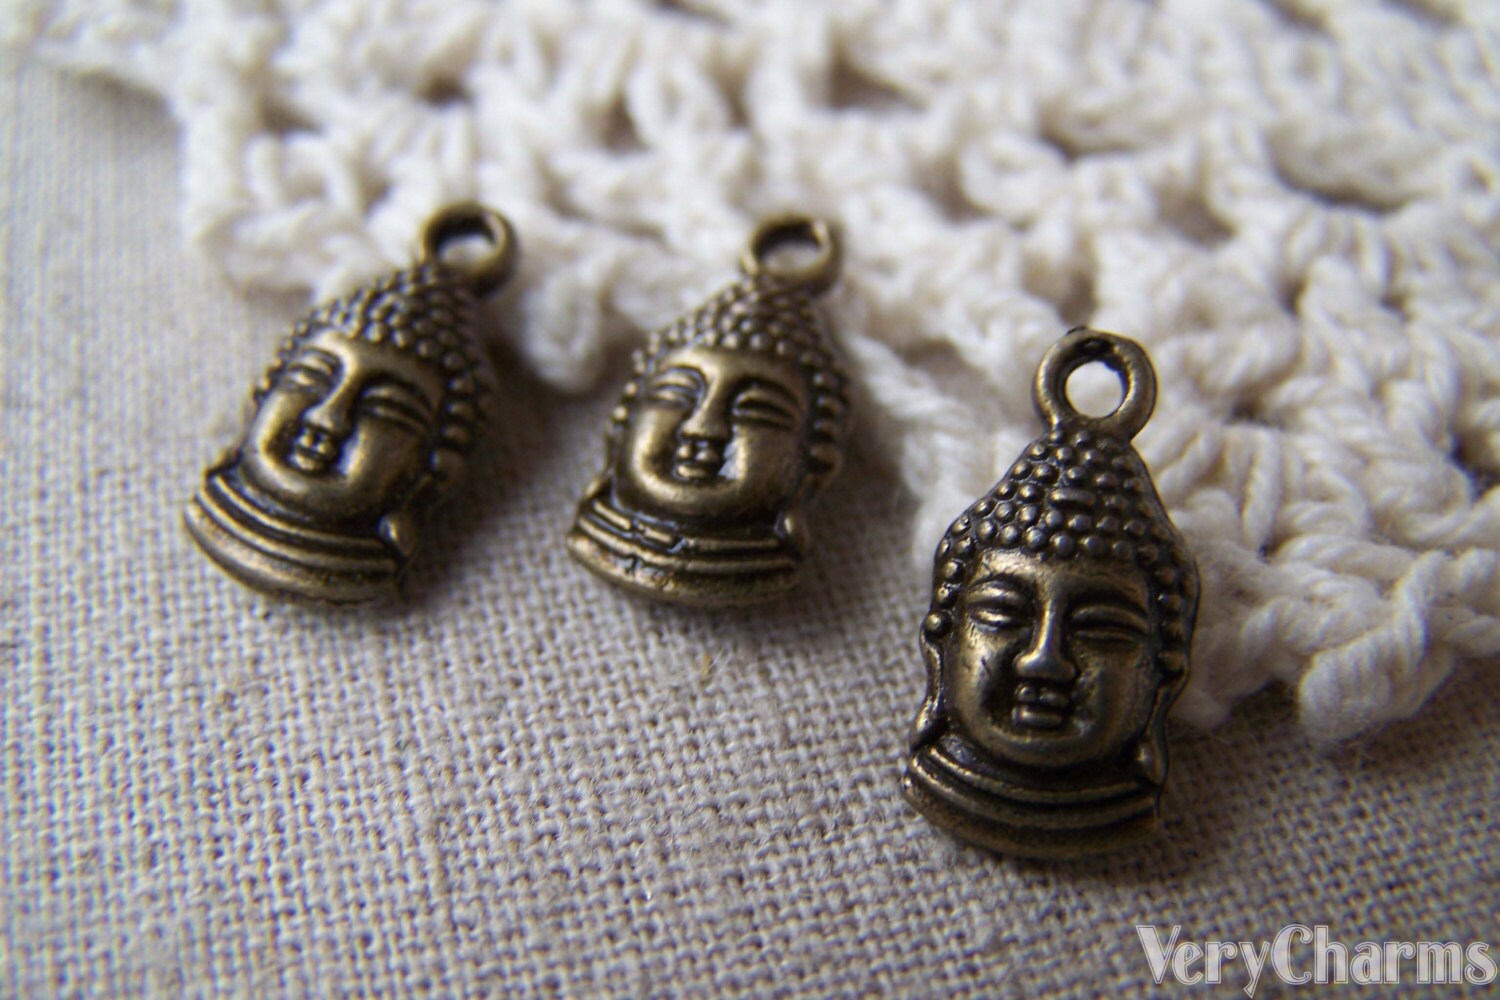 20 Pcs of Antique Bronze 3D Buddha Head Charms Double Sided - Etsy